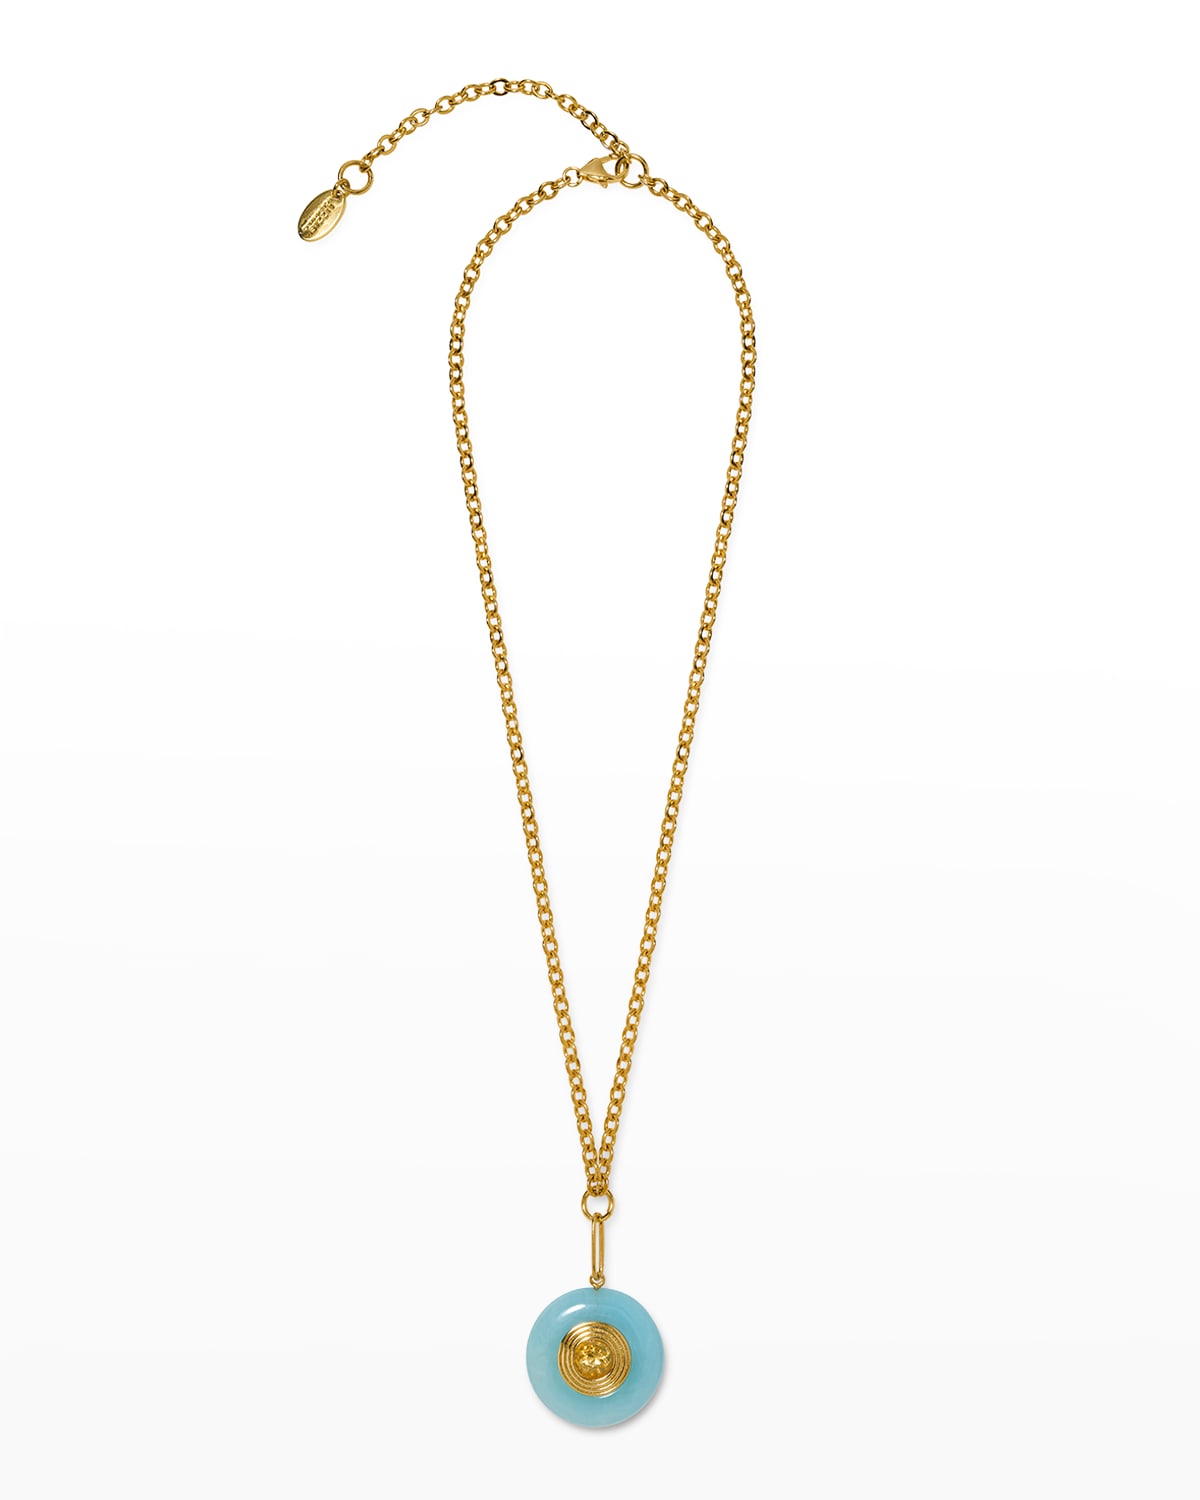 LIZZIE FORTUNATO REFLECTING POOL PENDANT NECKLACE IN BLUE